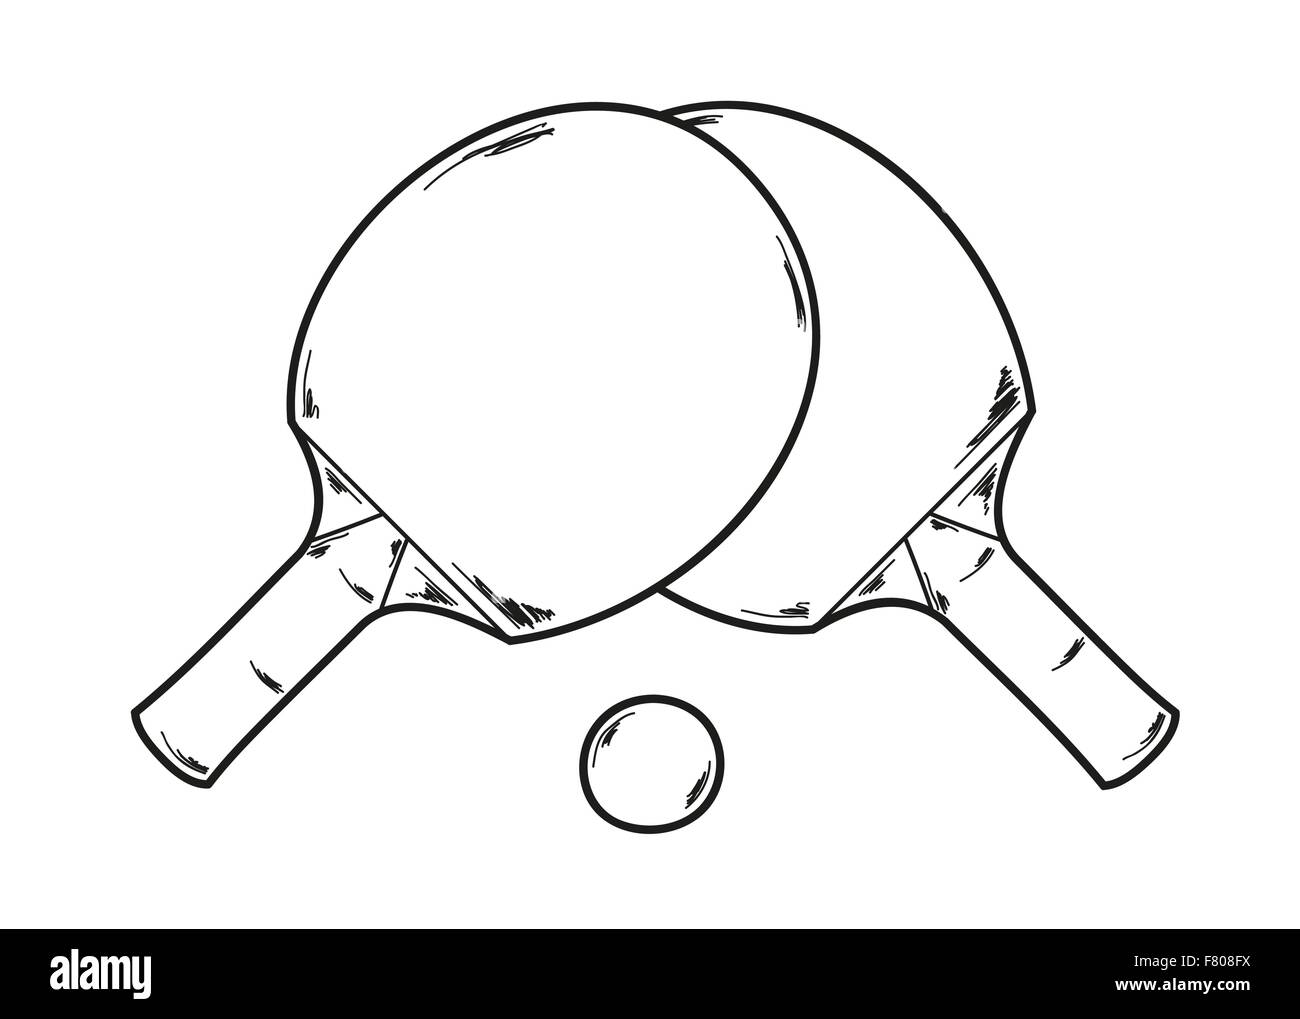 Cartoon ping pong paddle ball Black and White Stock Photos & Images - Alamy